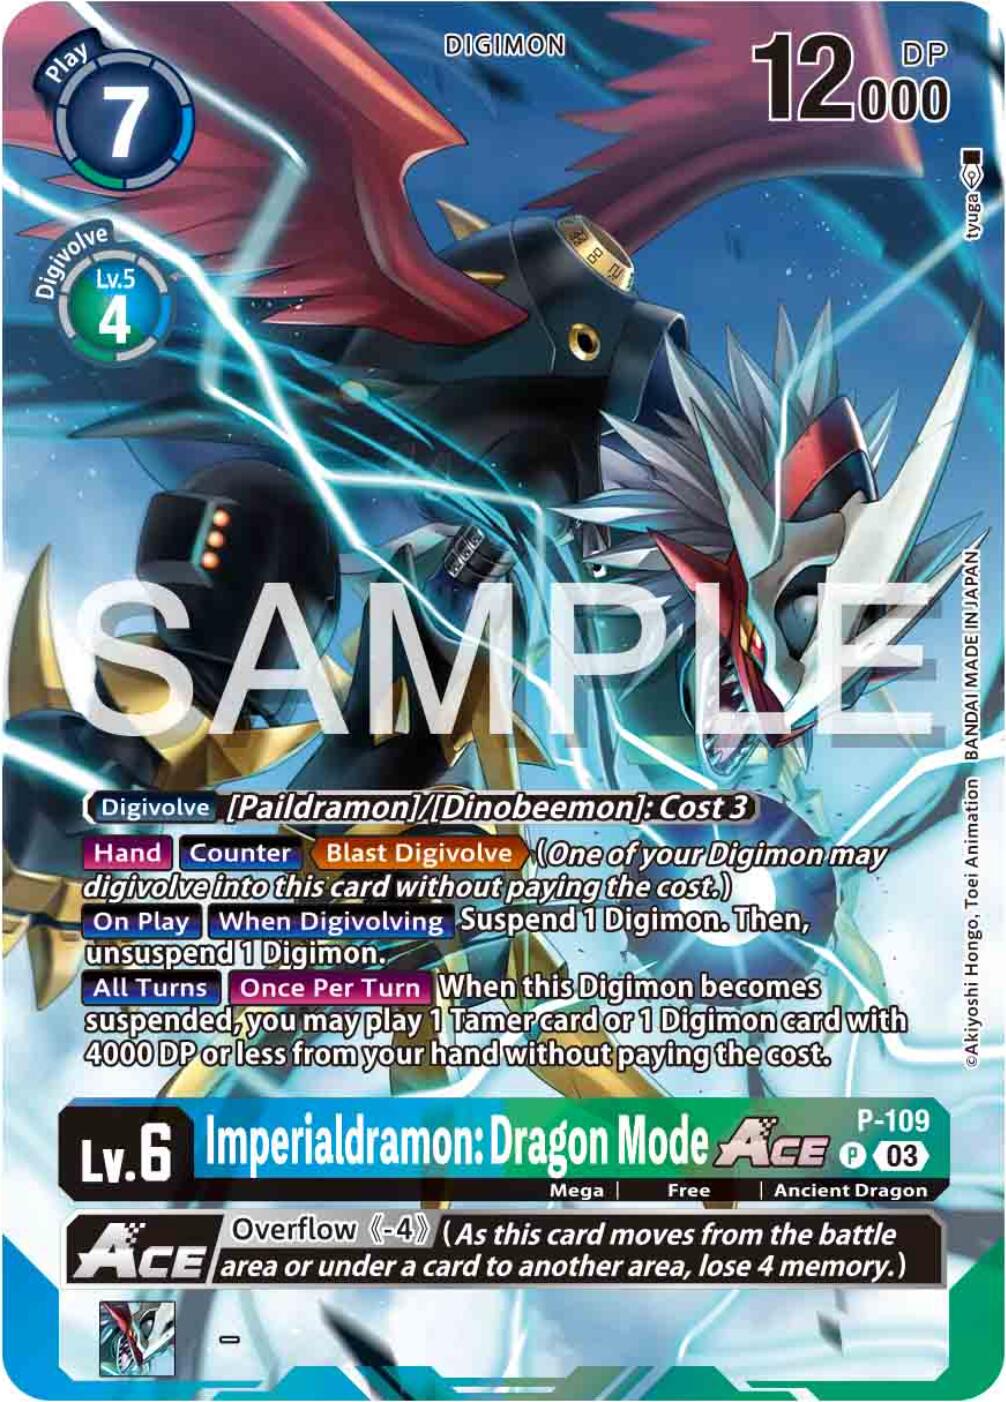 Imperialdramon: Dragon Mode ACE [P-109] (Digimon Adventure 02: The Beginning Set) [Promotional Cards] | Anubis Games and Hobby